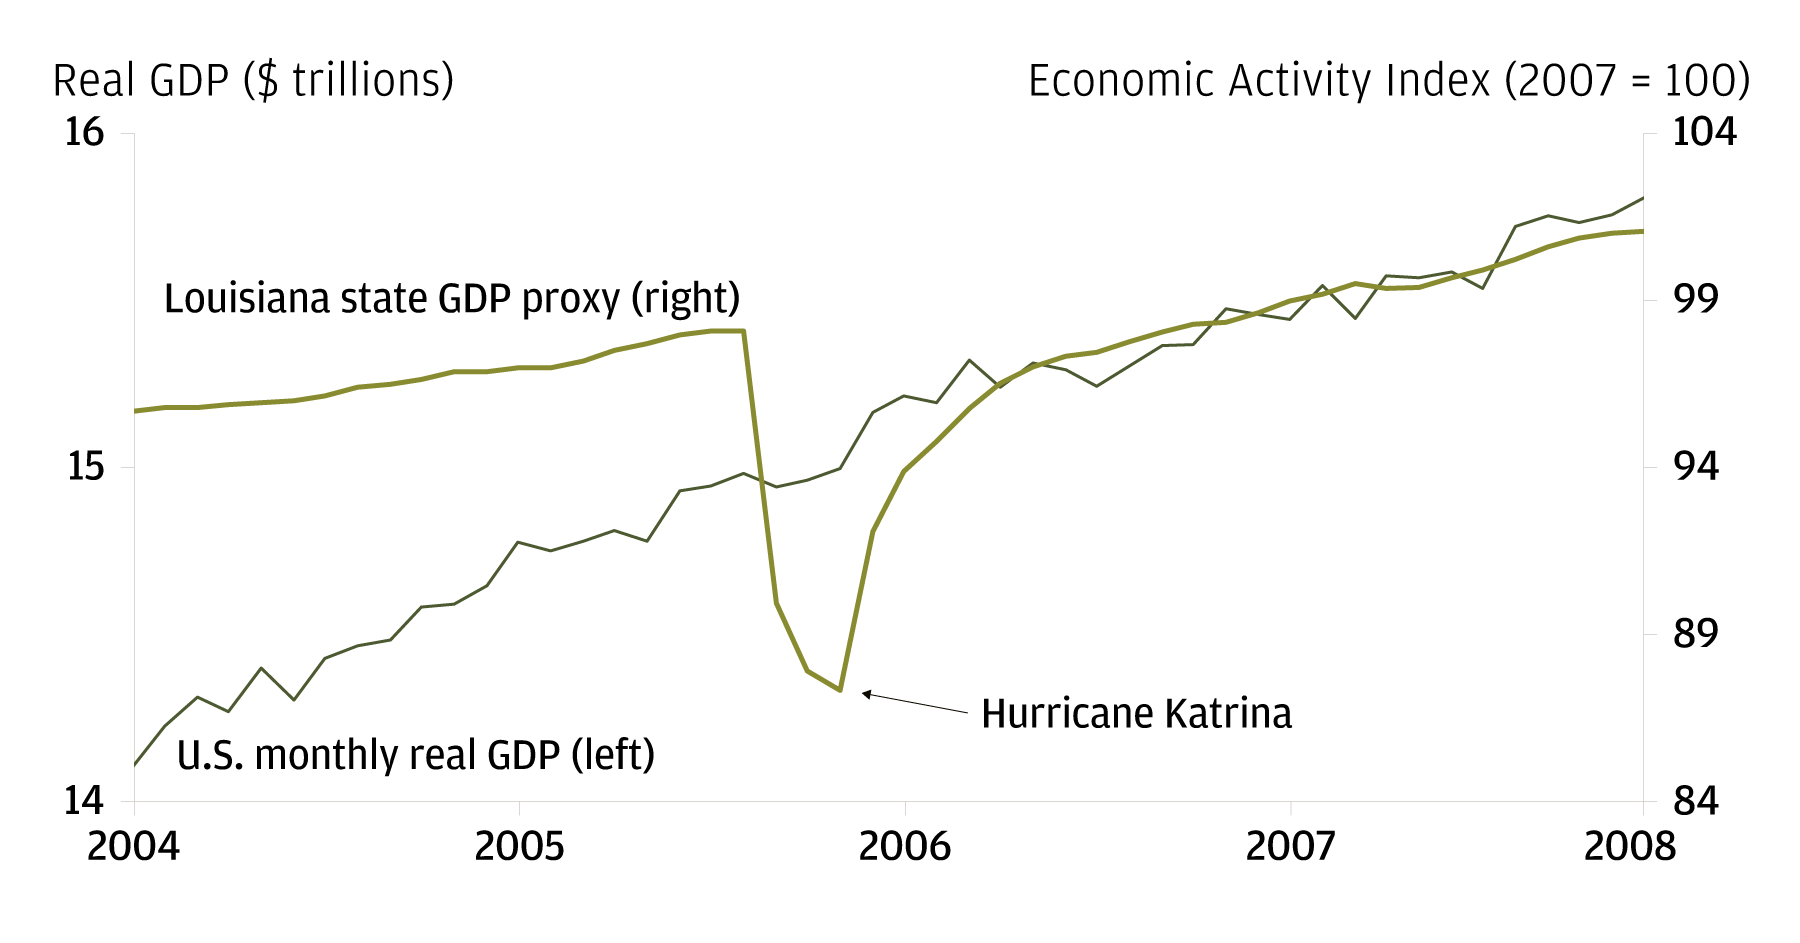 Historically, natural disasters haven’t shown up in national GDP. This chart compares U.S. monthly real GDP to “Louisiana Coincident Economic Activity Index” from 2007 to 2021. The economic activity index took a sharp drop during Hurricane Katrina in 2005, however it recovered and continued to run alongside U.S. monthly real GDP.